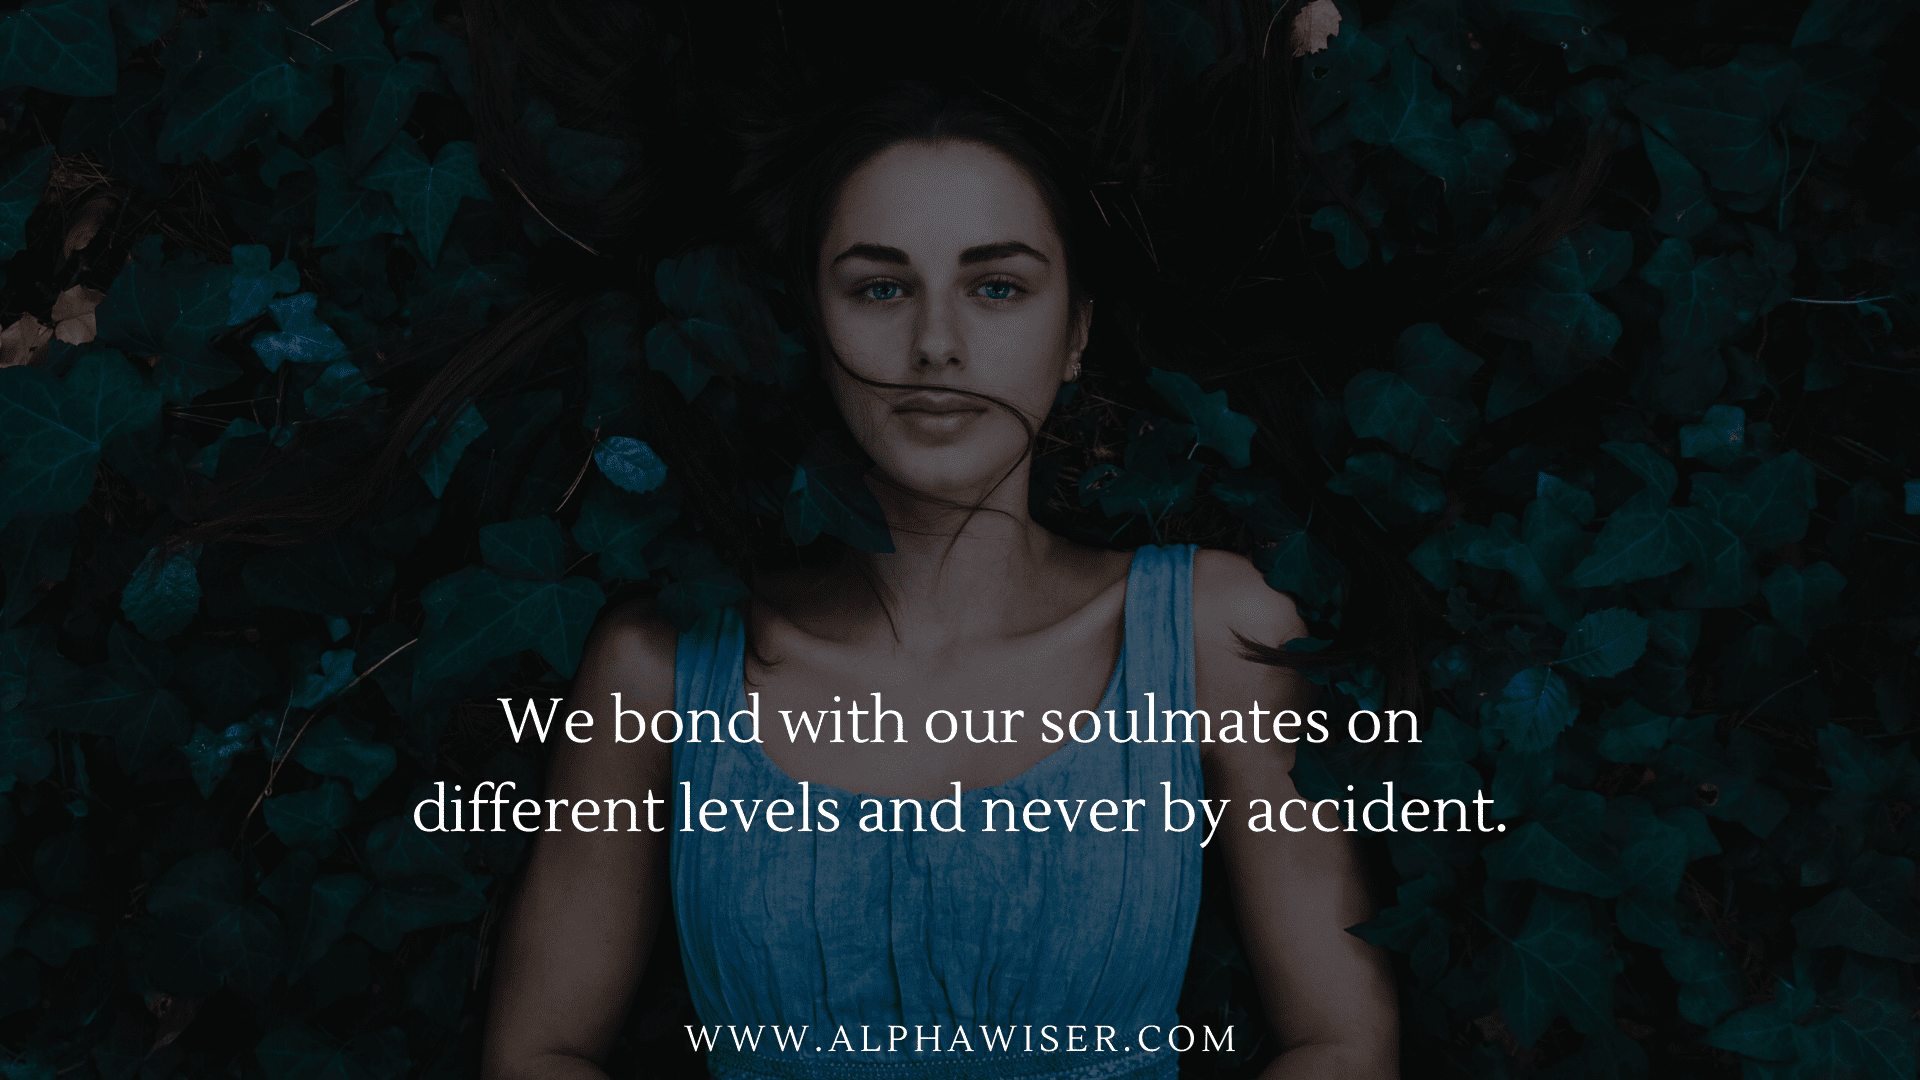 We bond with our soulmates on different levels and never by accident